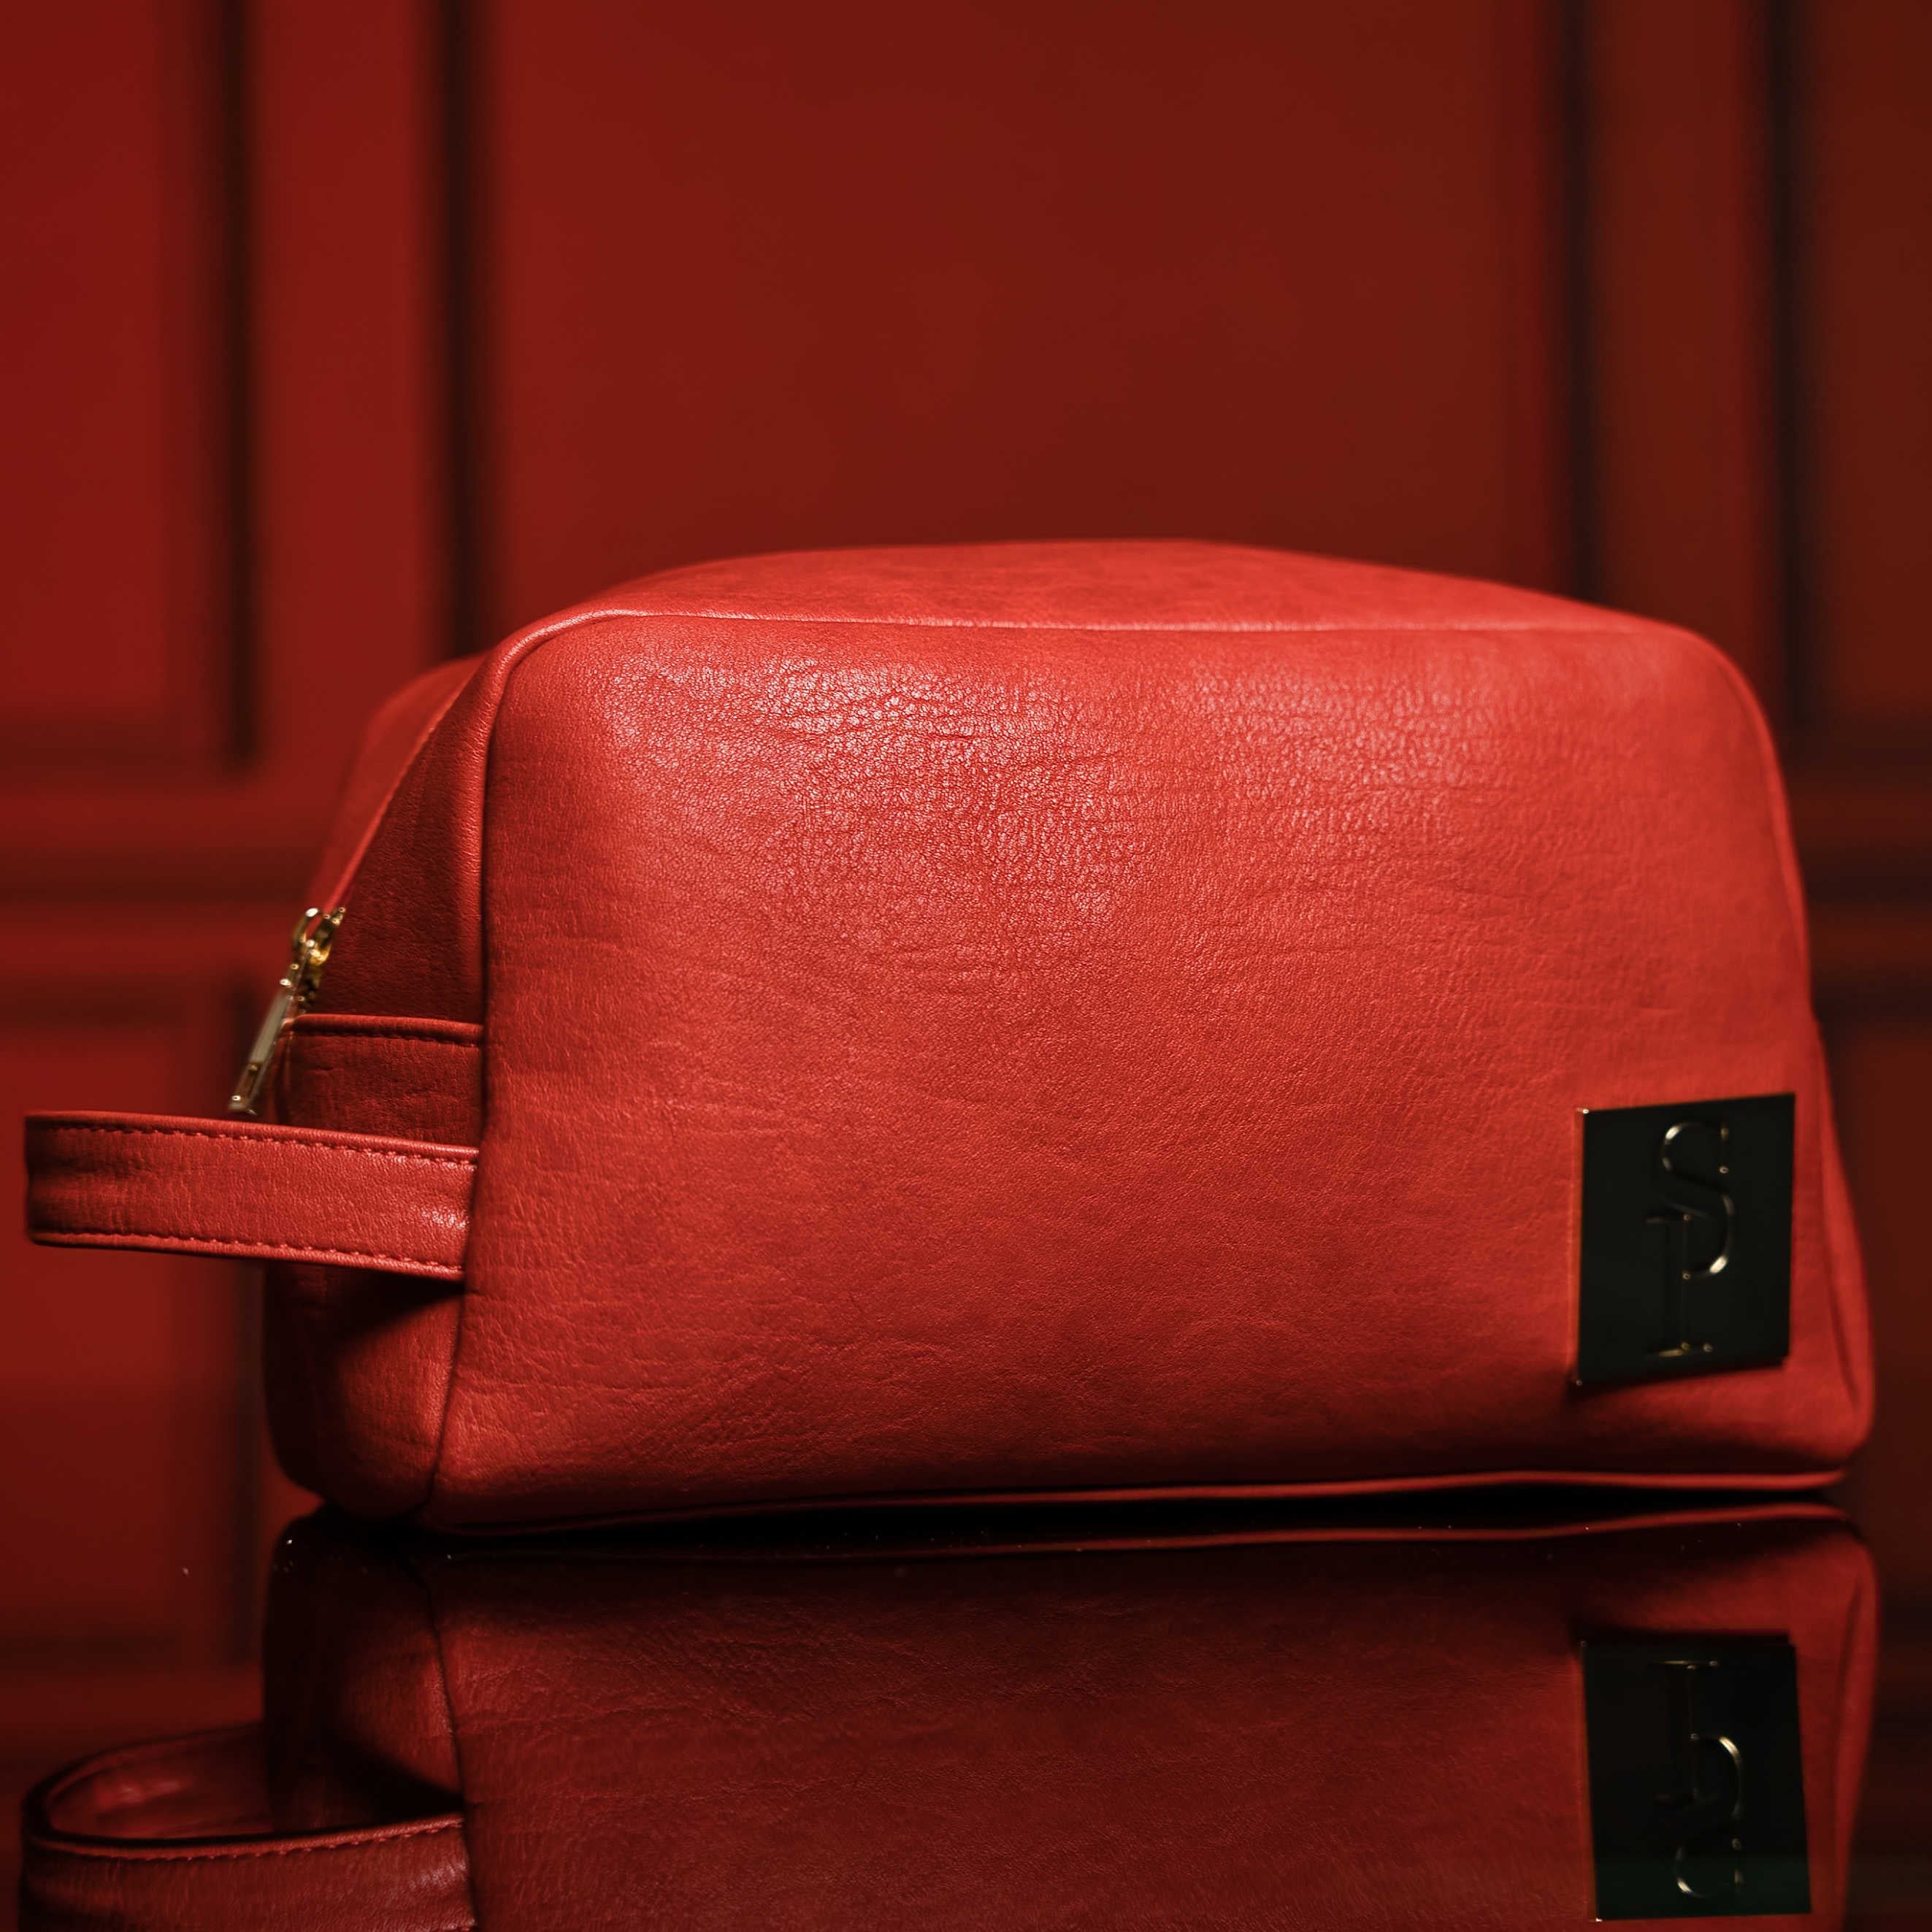 Red Tumbled Leather Toiletry Bag - Sole Premise